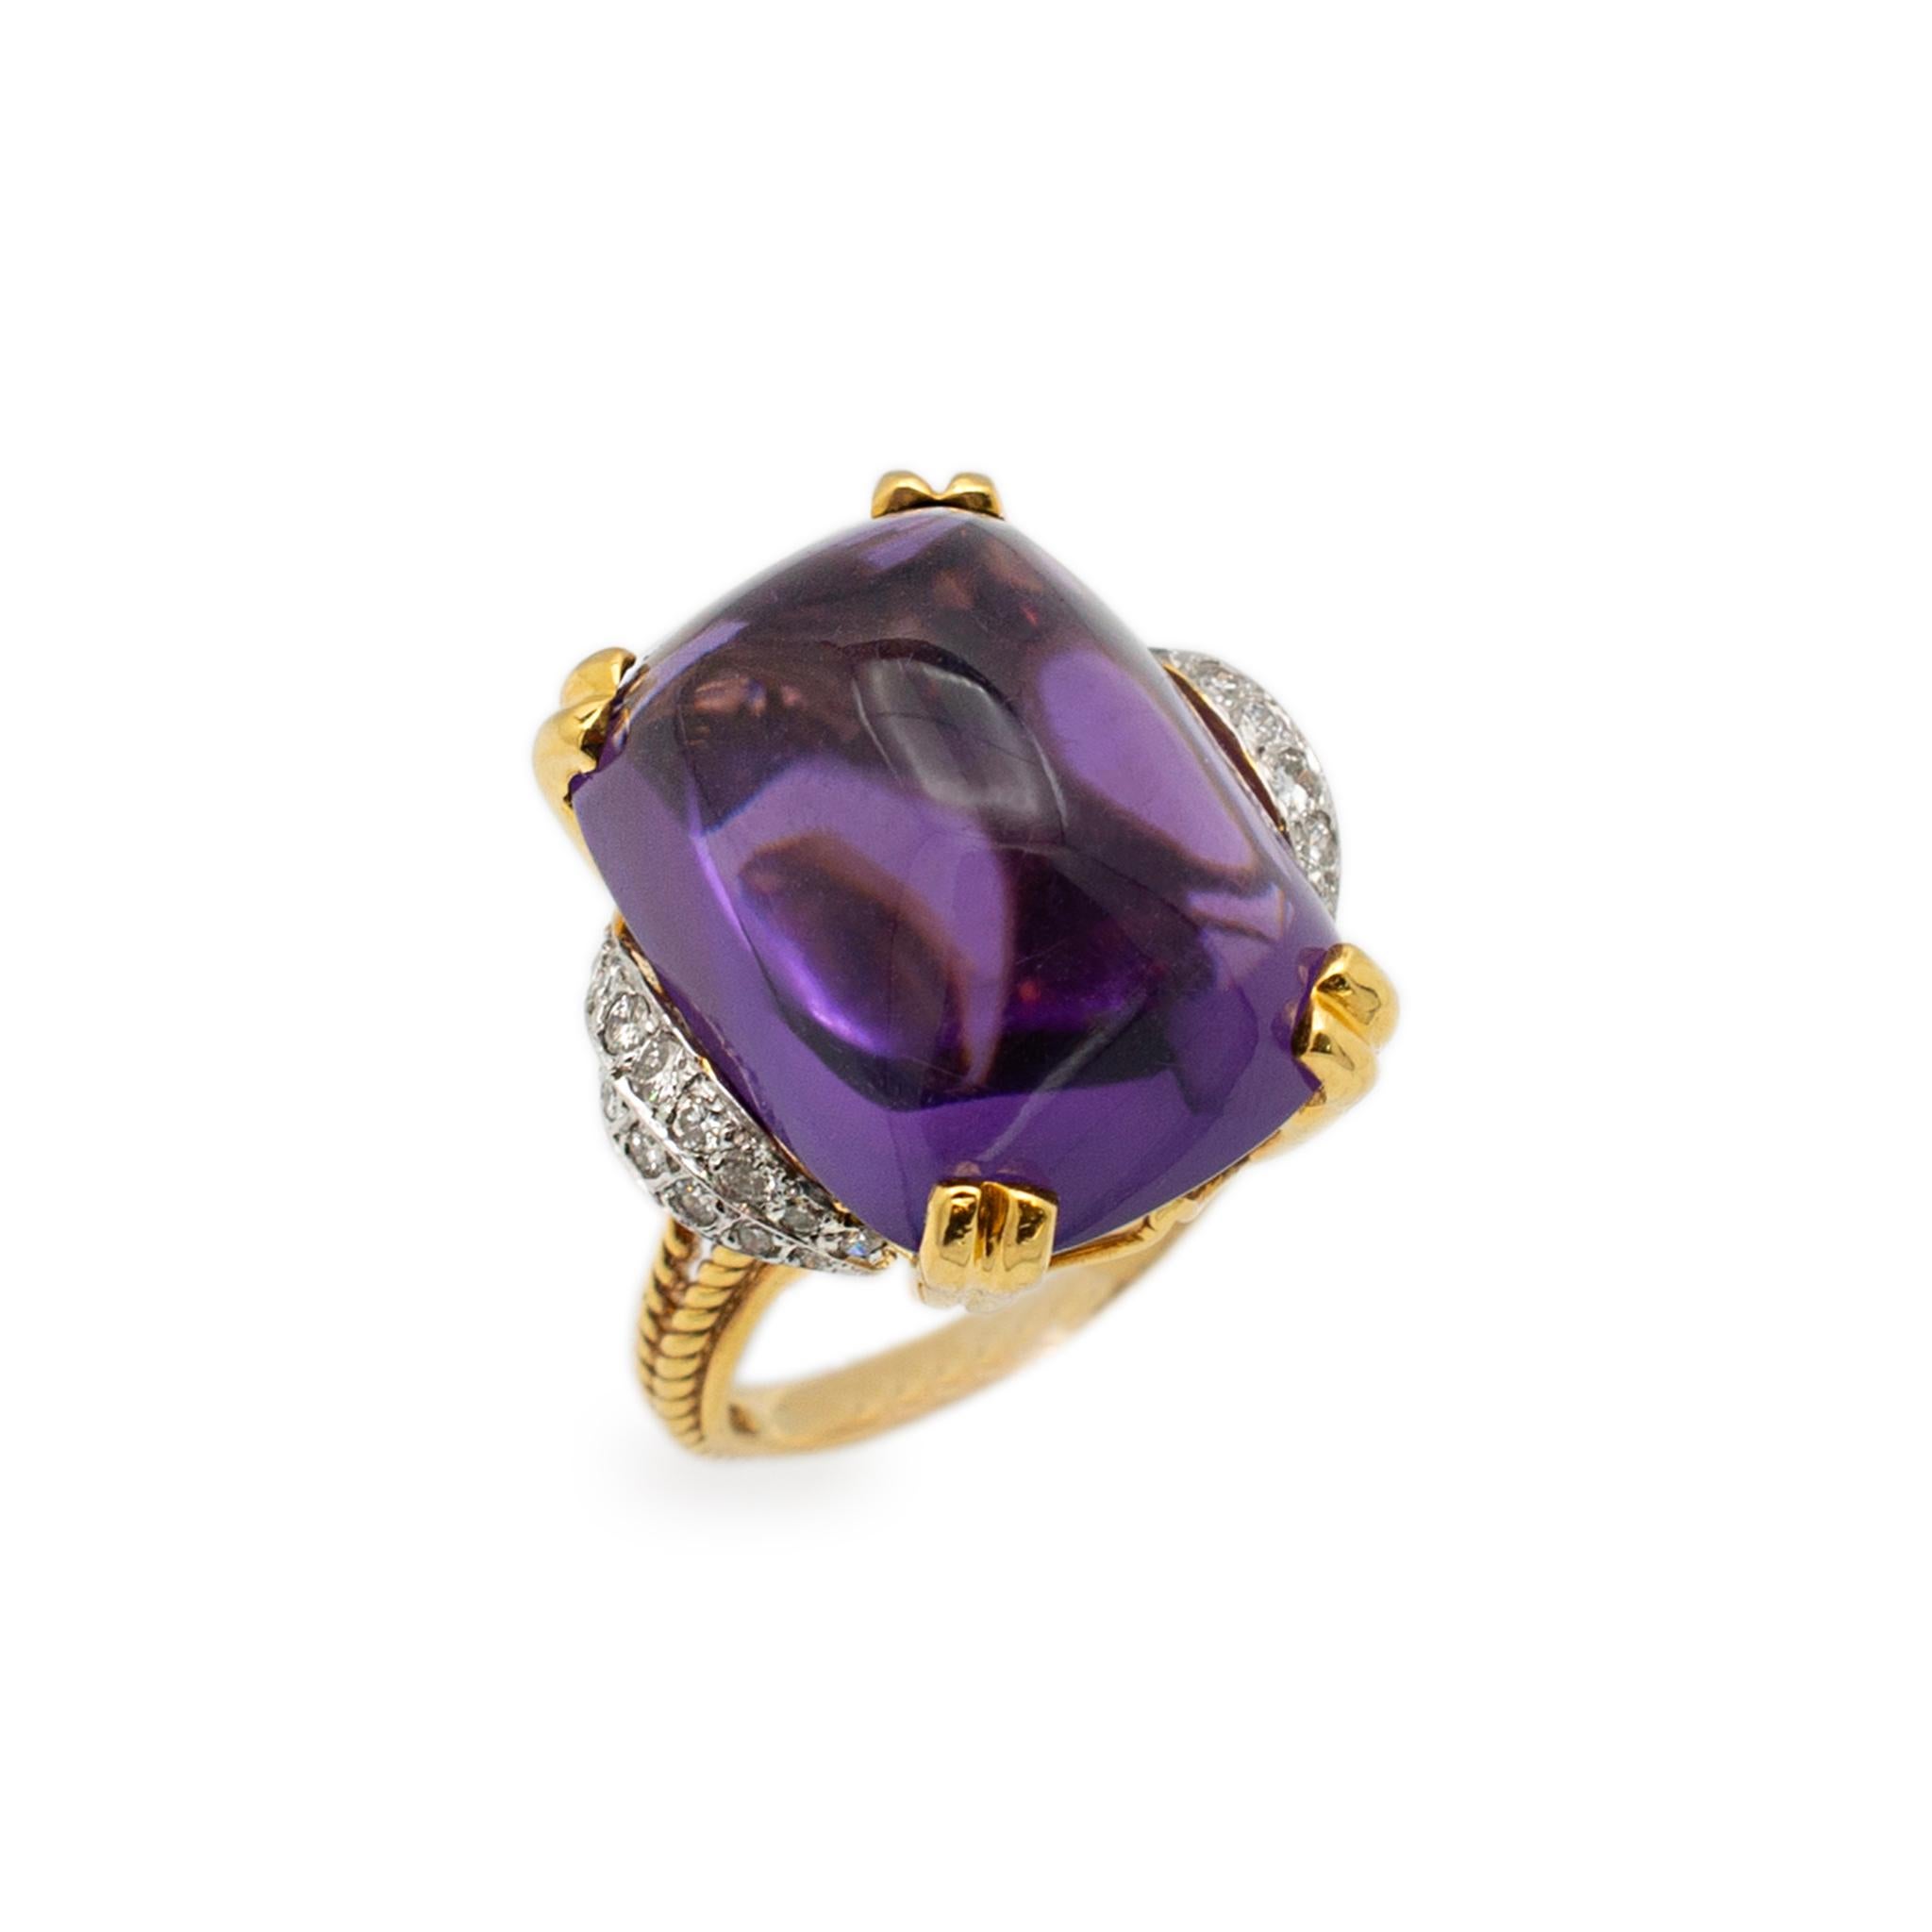 Gender: Ladies

Metal Type: 14K Yellow & White Gold

Size: 7

Shank maximum width: 3.85mm

Weight: 11.30 grams

Ladies 14K white & yellow gold diamond and amethyst cocktail vintage birthstone ring with a half round shank.

Pre-owned in excellent